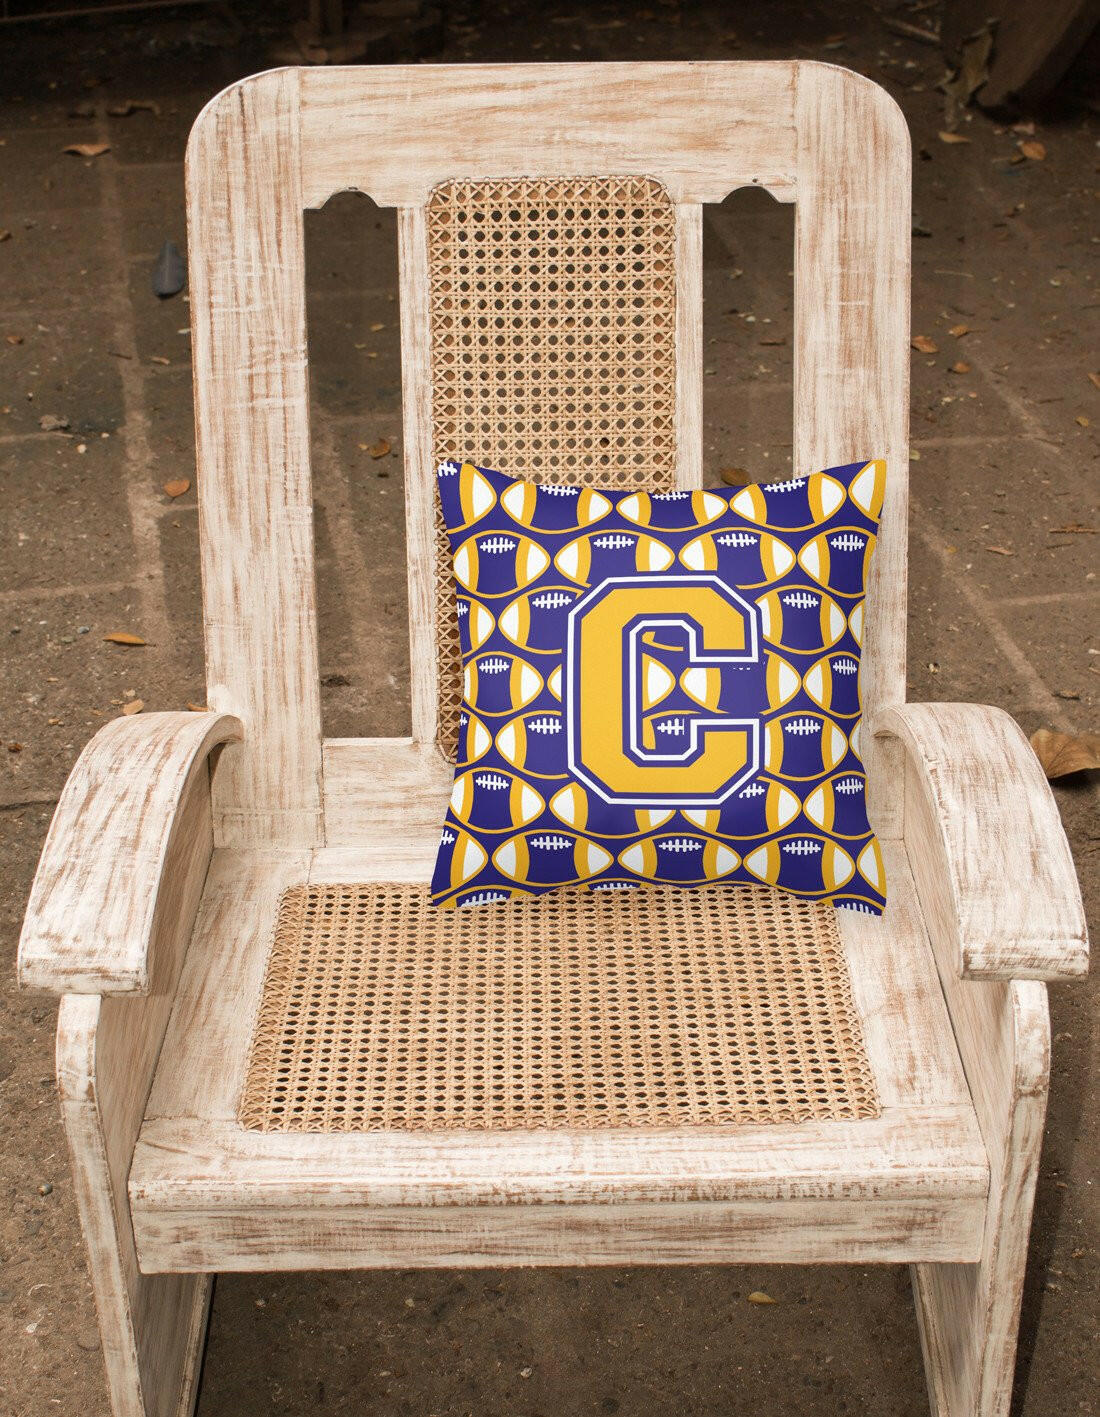 Letter C Football Purple and Gold Fabric Decorative Pillow CJ1064-CPW1414 by Caroline's Treasures